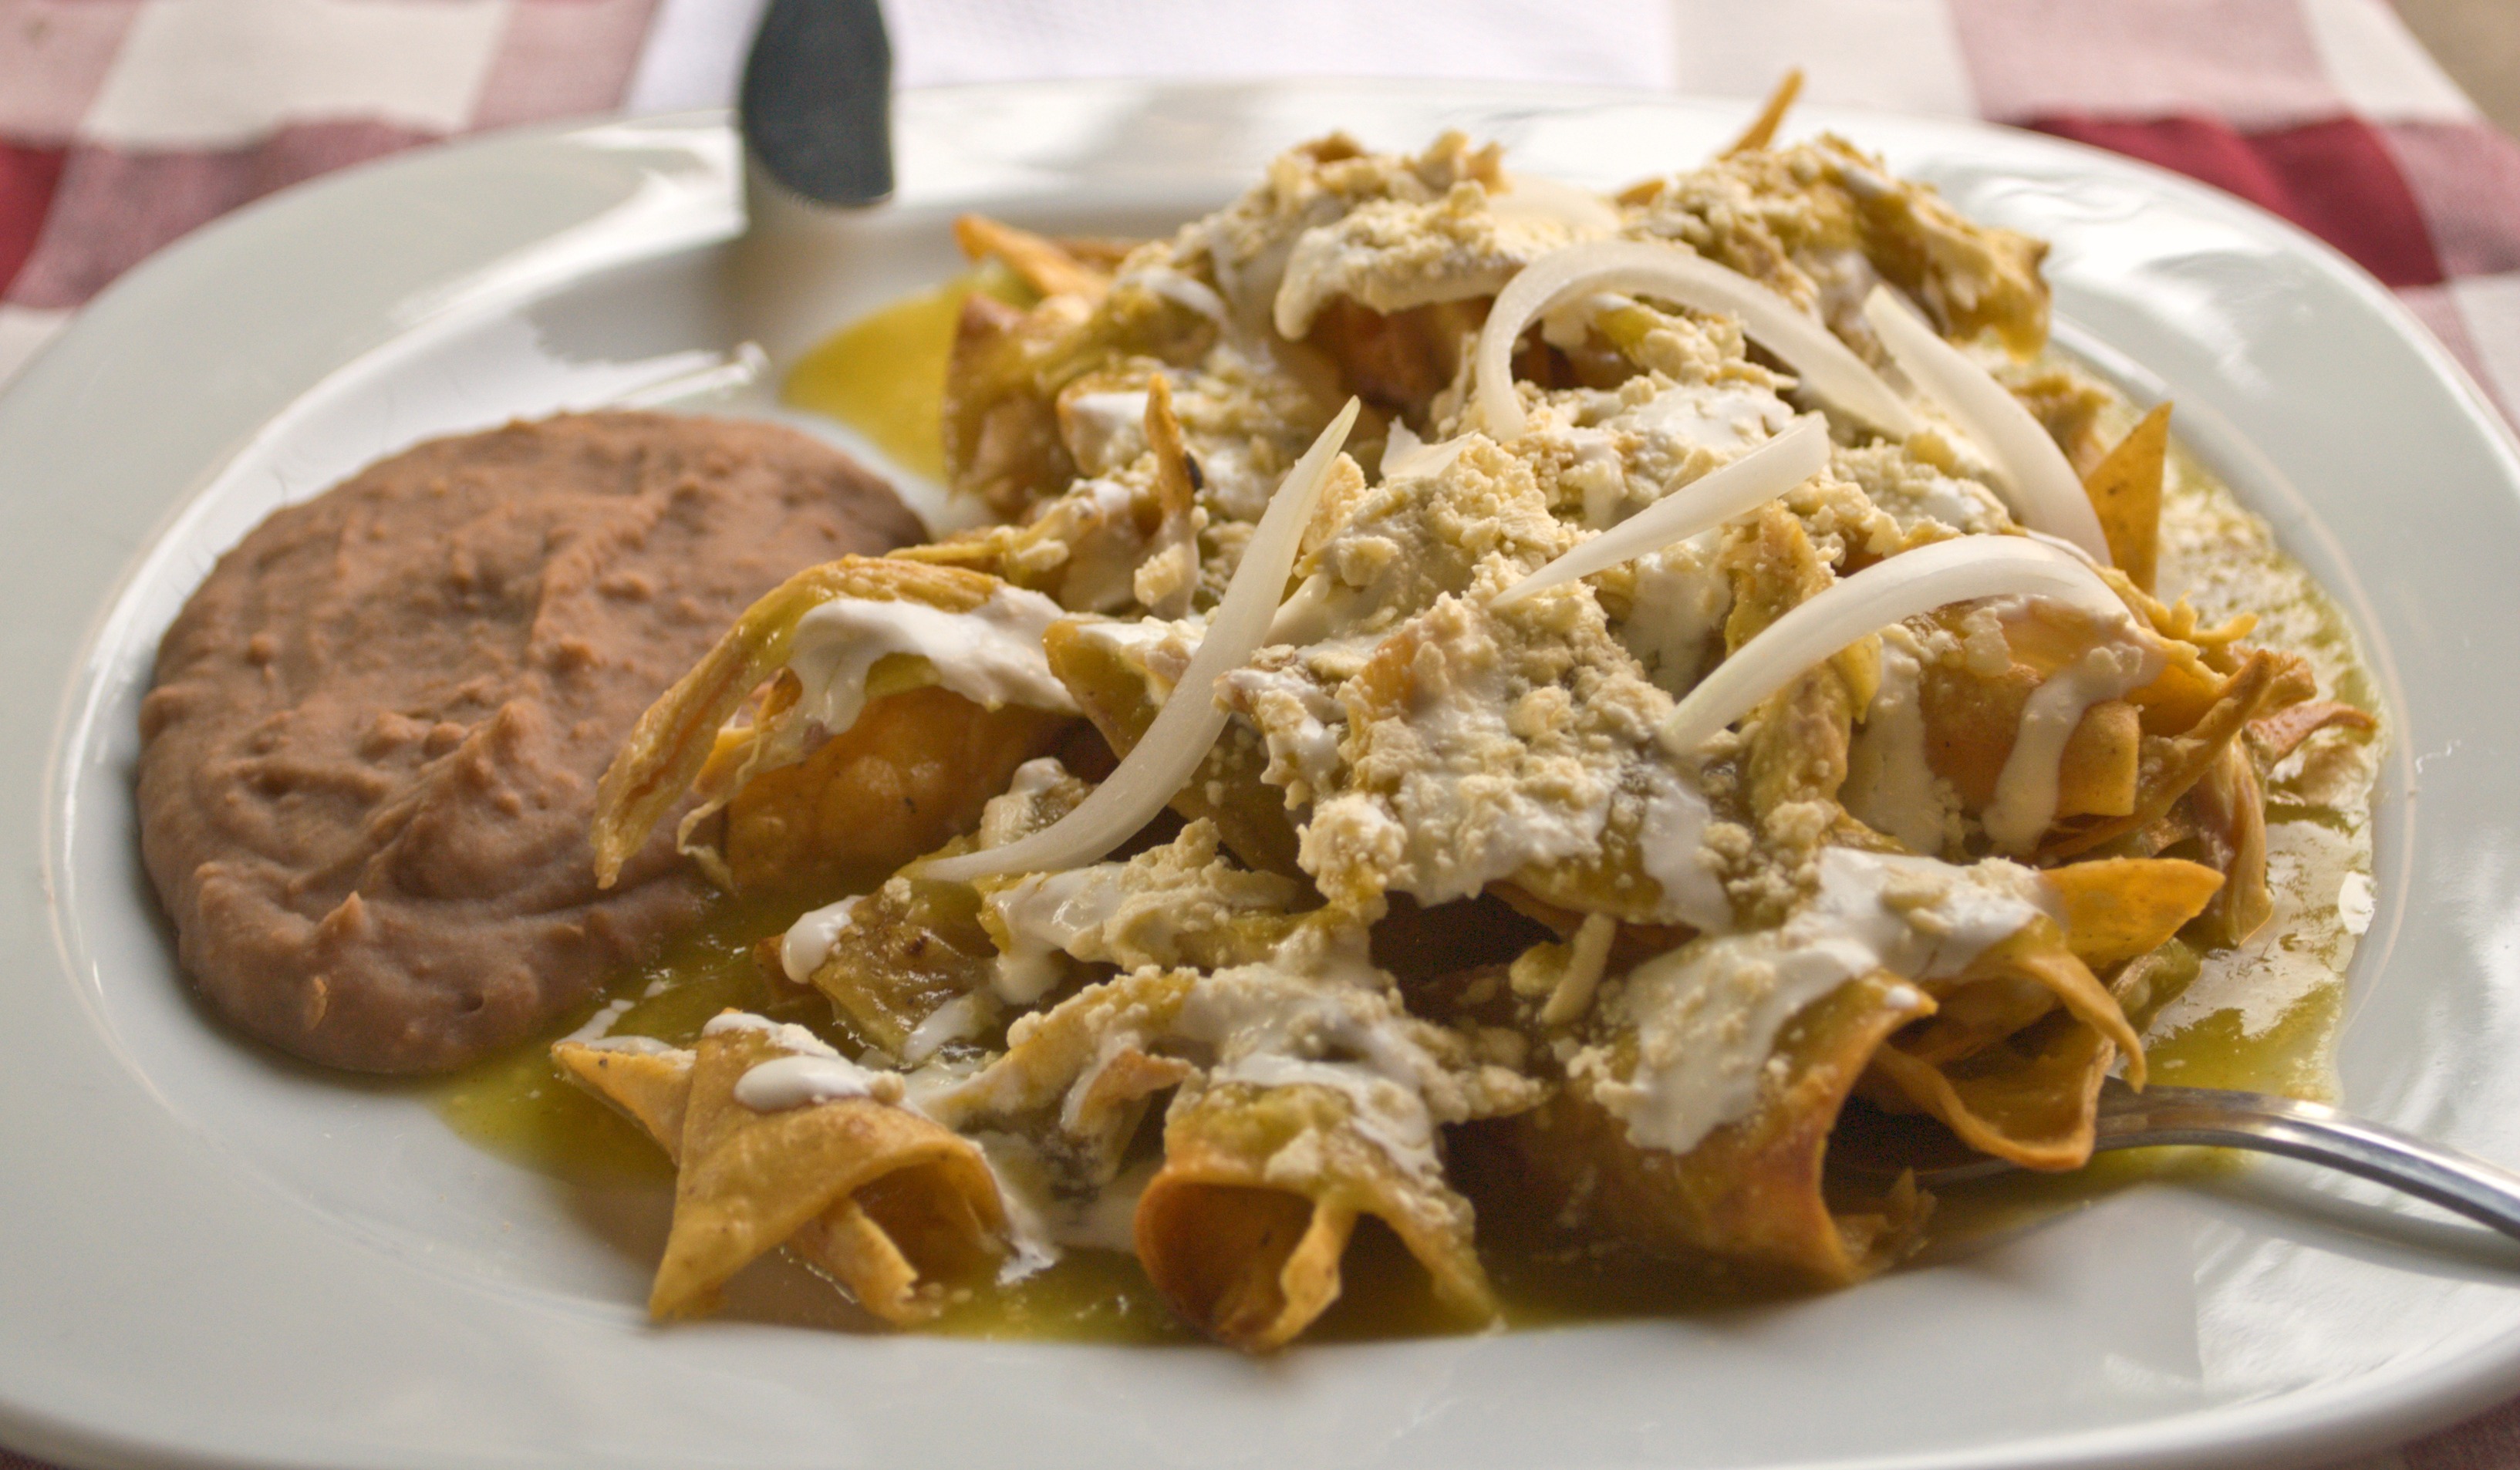 01_Chilaquiles_verdes_con_frijoles_chinos